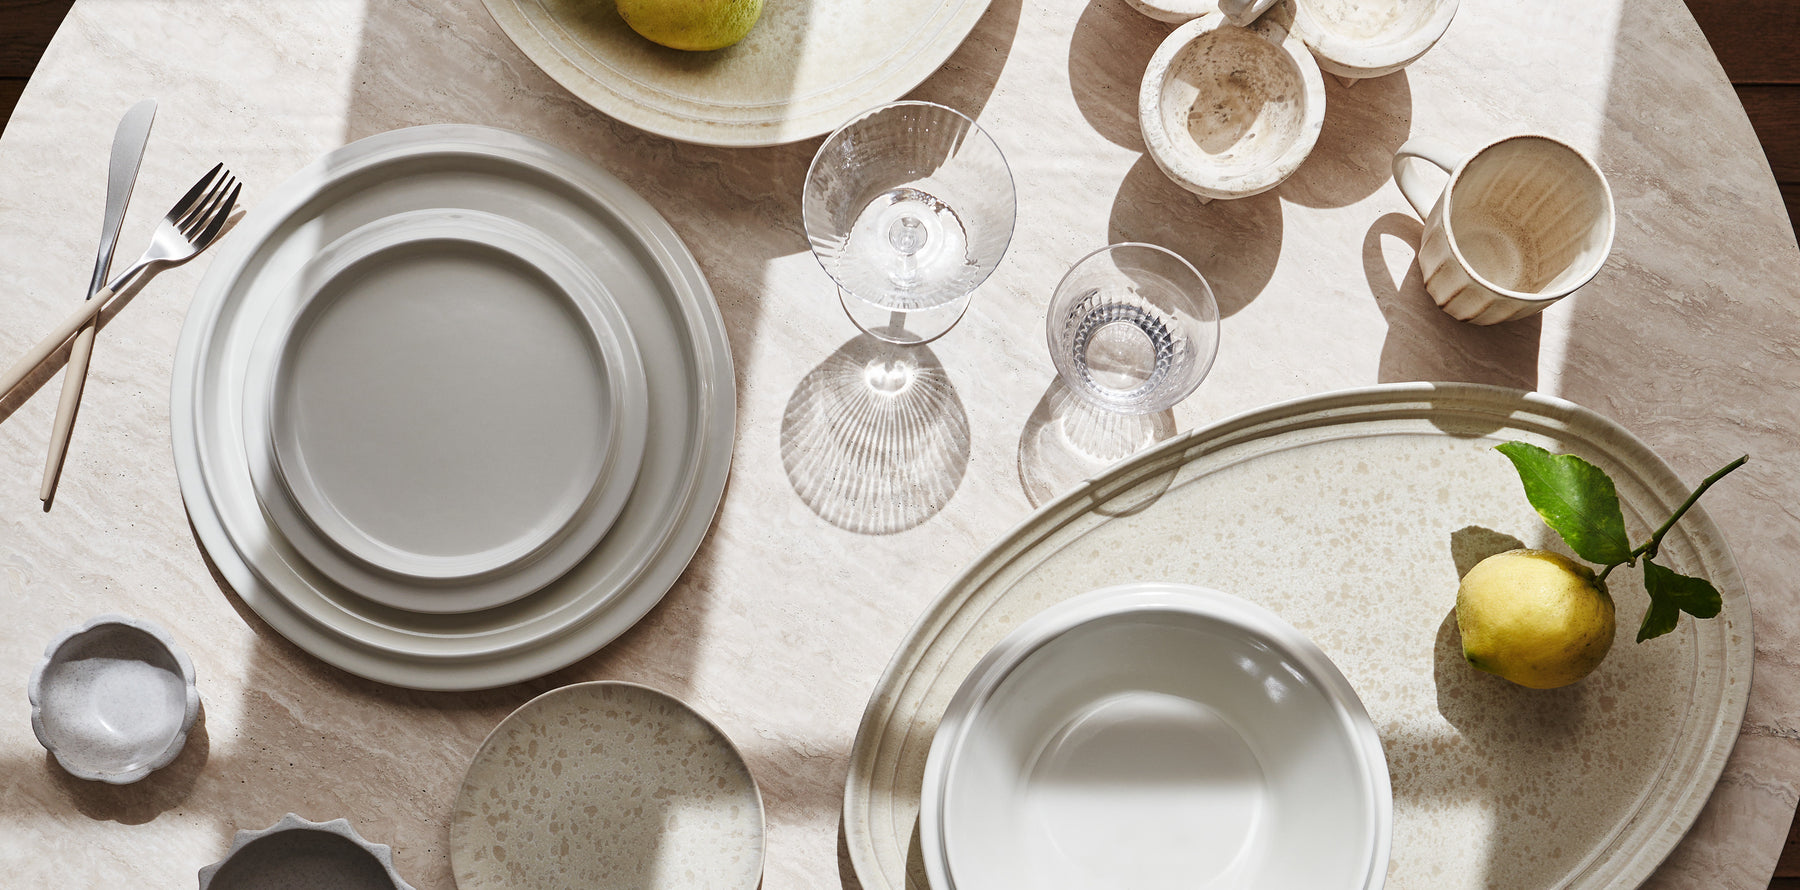 How to Choose Your Dinnerware: Materials, Type, and Tips